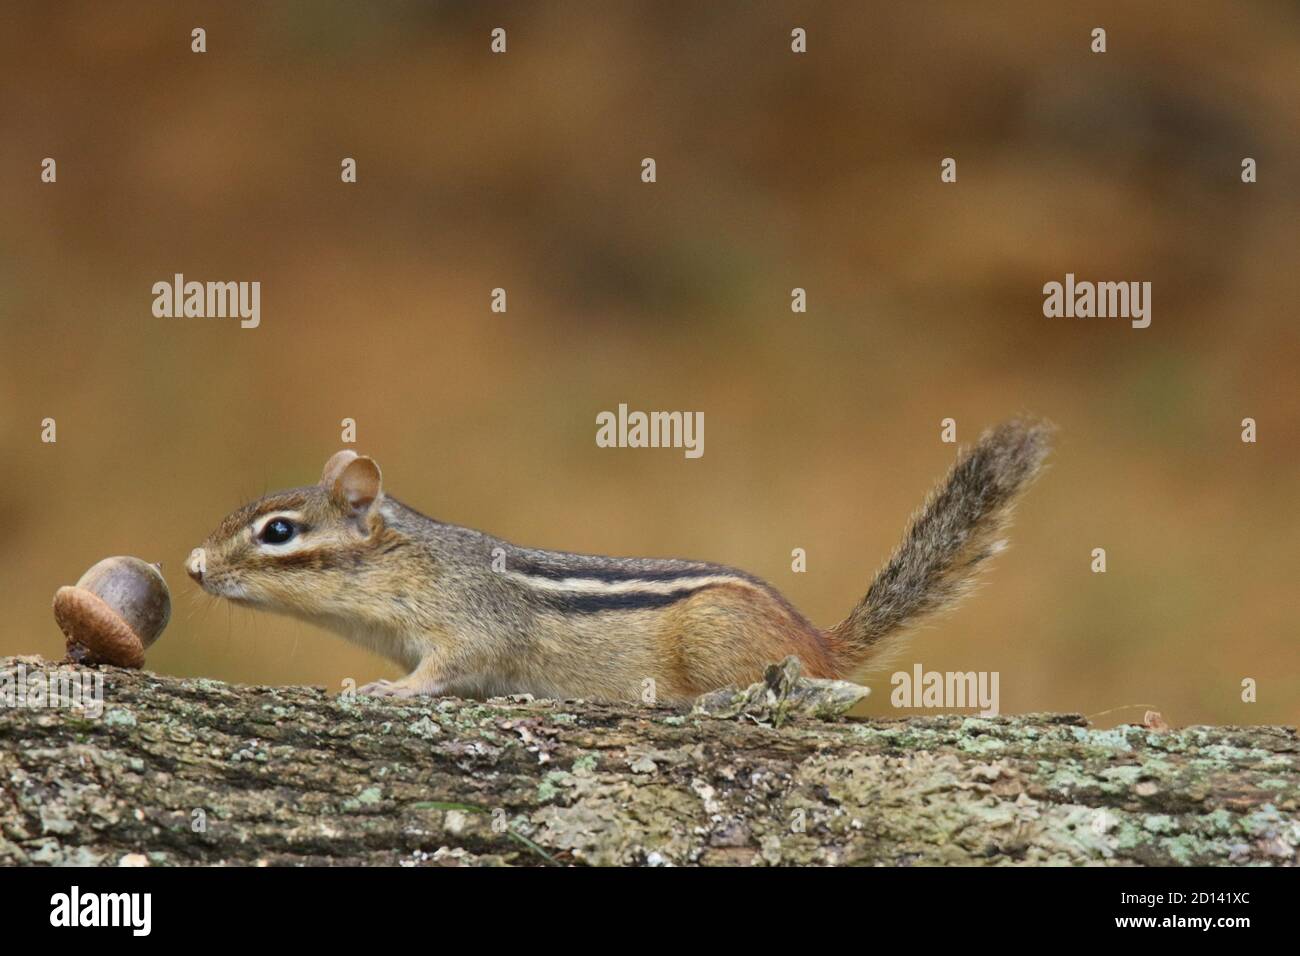 Cute Little Fall Chipmunk foraging for food to store away for winter sniffs out and acorn Stock Photo